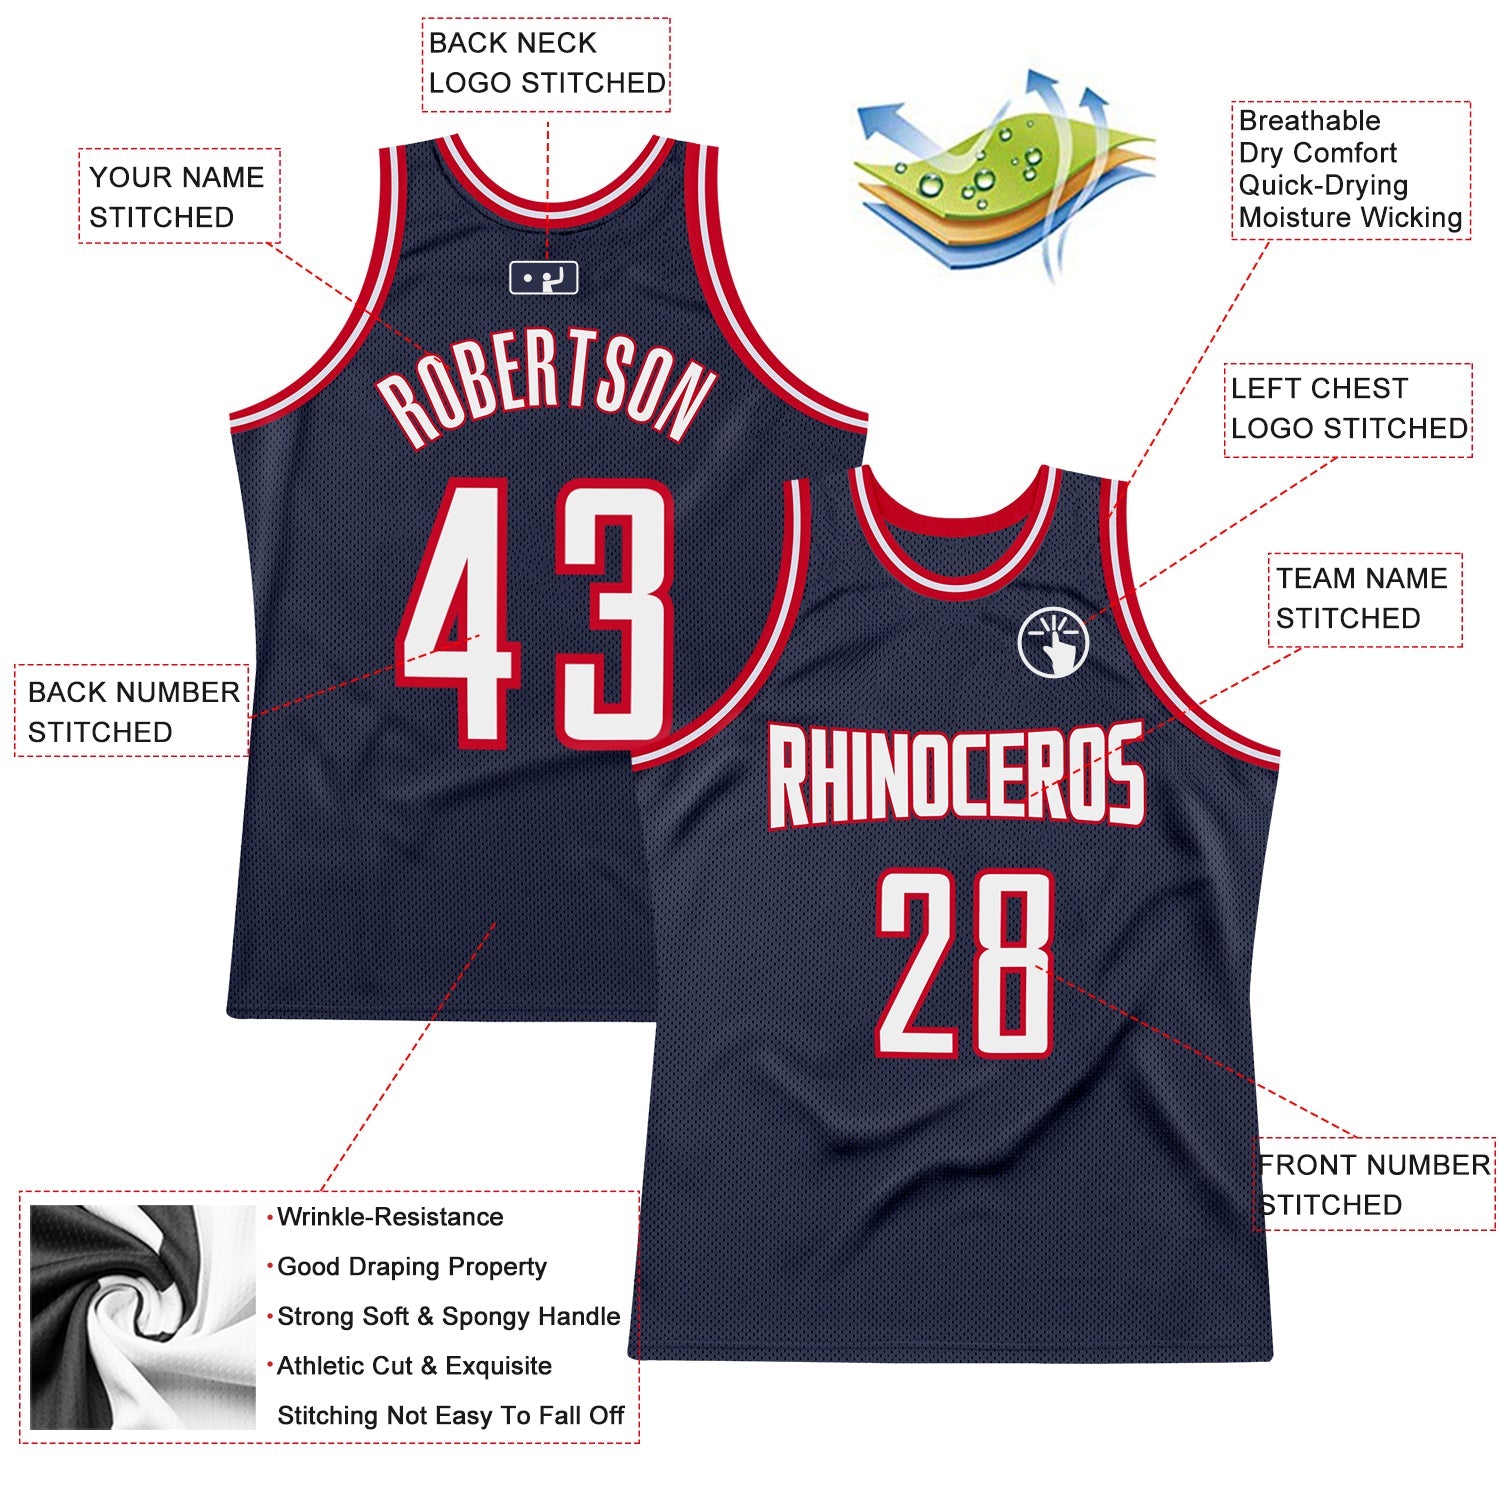 Custom Navy White-Red Authentic Throwback Basketball Jersey